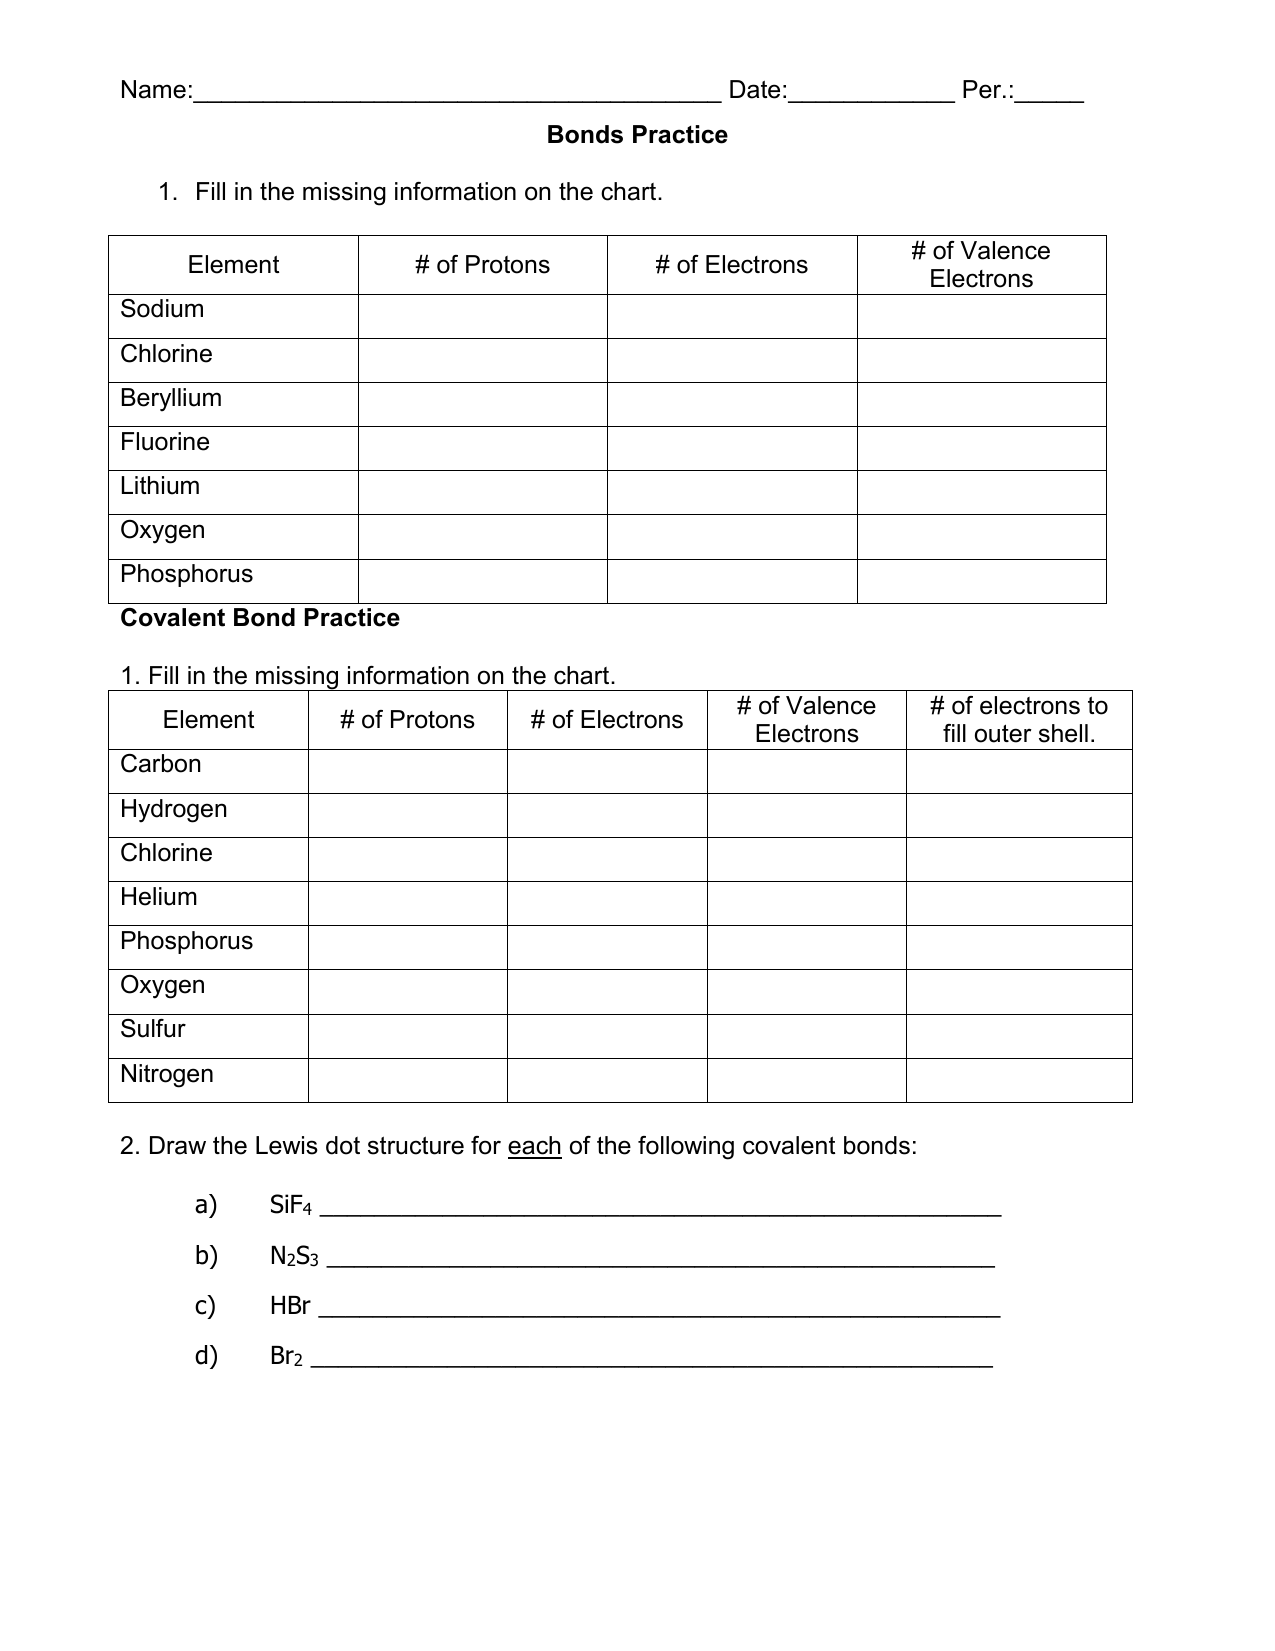 covalent bond practice In Covalent Bonding Worksheet Answers